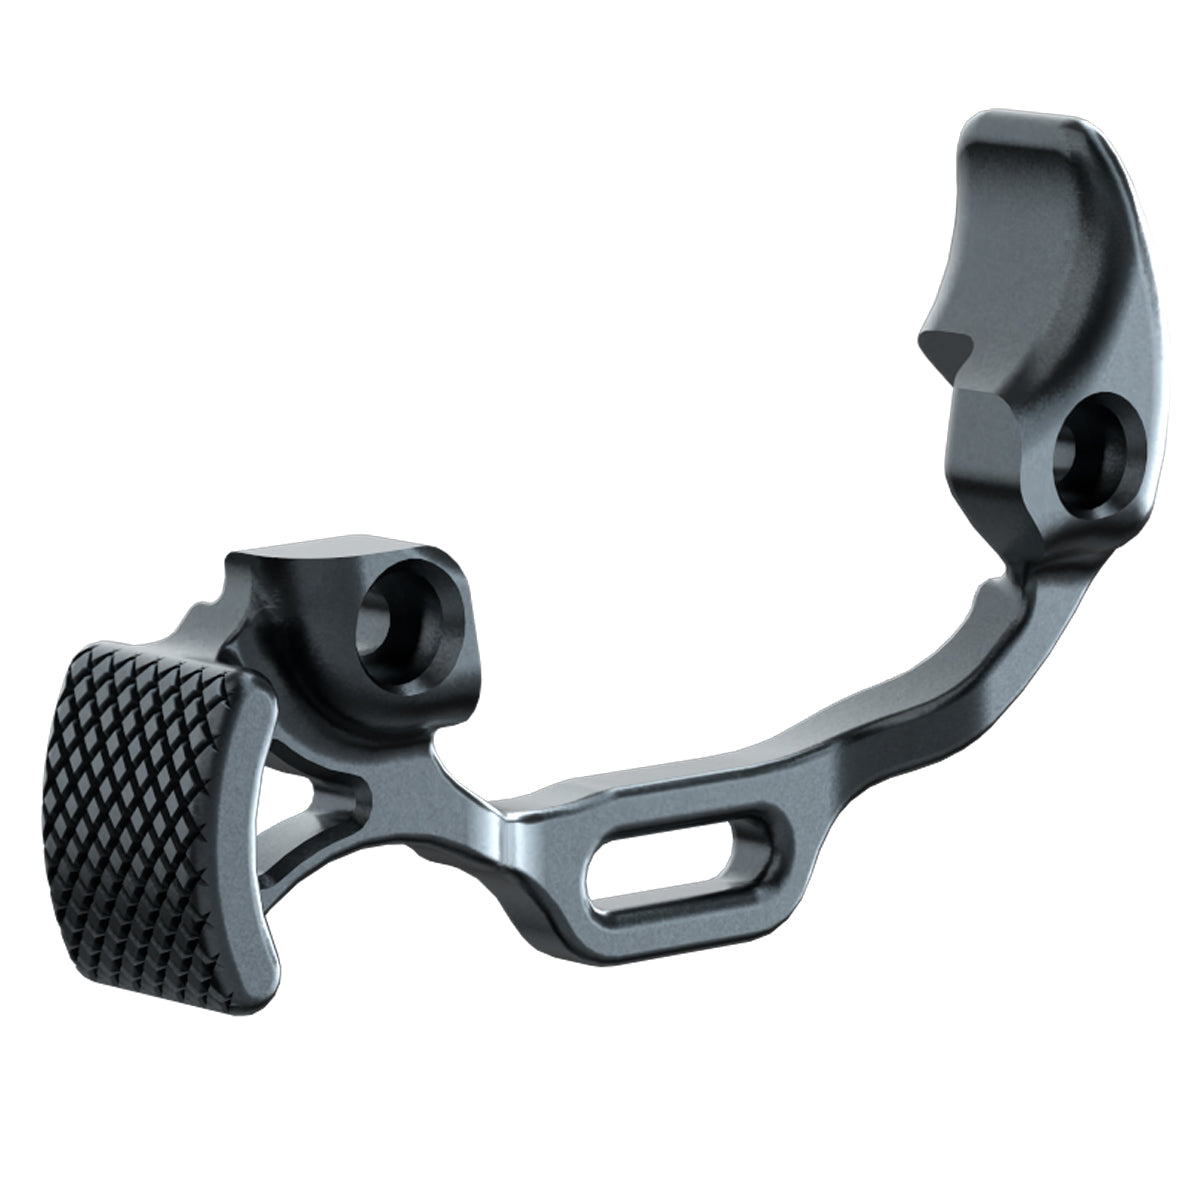 Ultraview Archery The Hinge 2 - Hunting Bracket in  by GOHUNT | Ultraview Archery - GOHUNT Shop